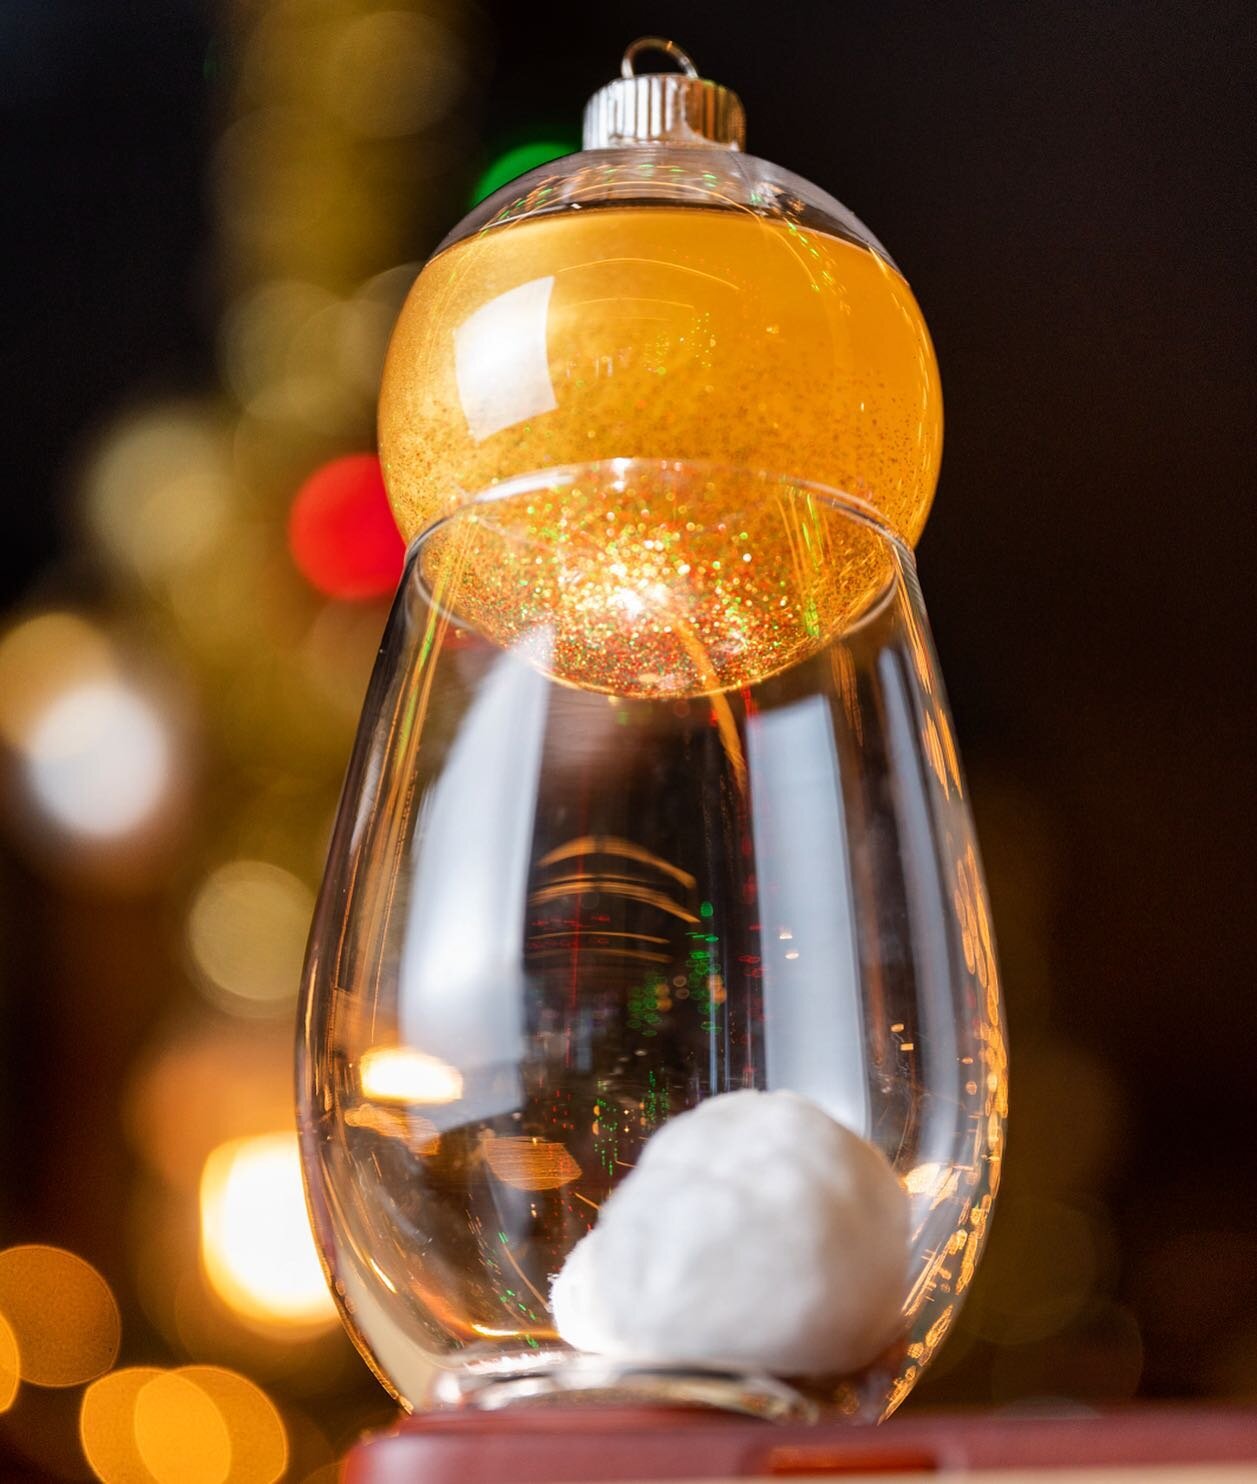 We challenge you to a snowball fight&hellip;this one&rsquo;s with vodka, aperitif wine, gin, rosemary, sweet snowball, and shiny stuff ☃️
📸 @porkbellystudio 

#deckthehallsbar #tistheseason #holidaycocktails #drinksf #deckthehalls #snowball #ornamen